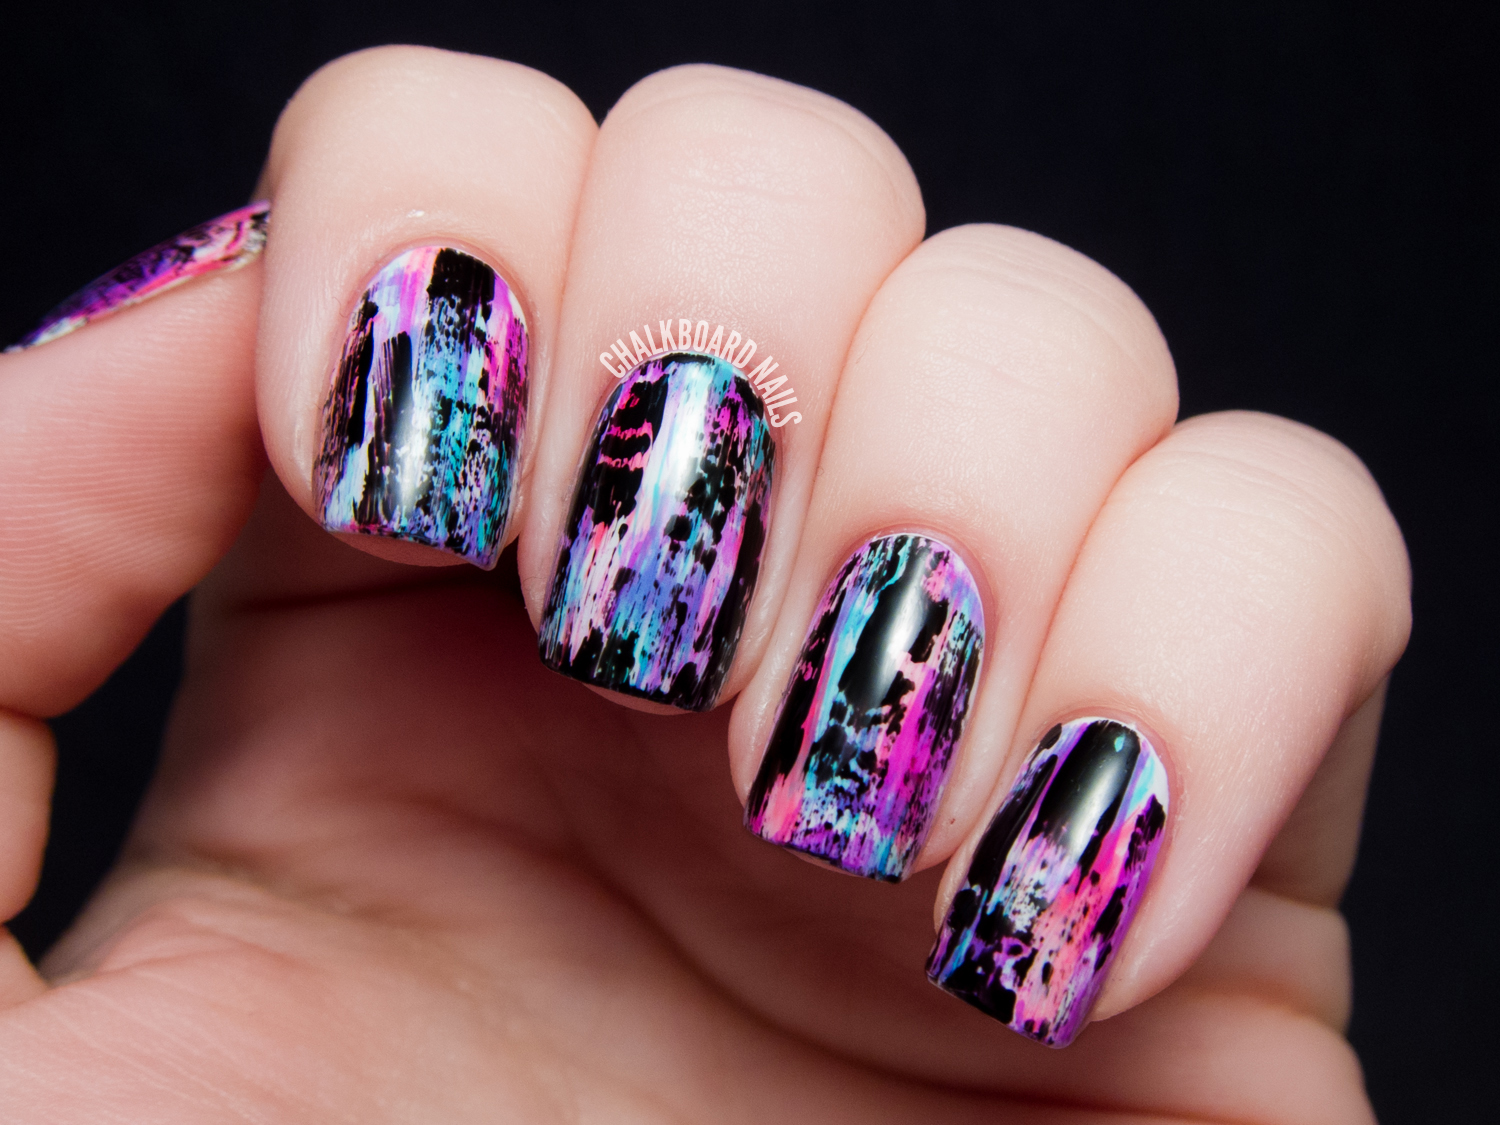 3. "Edgy Nail Designs" - wide 6